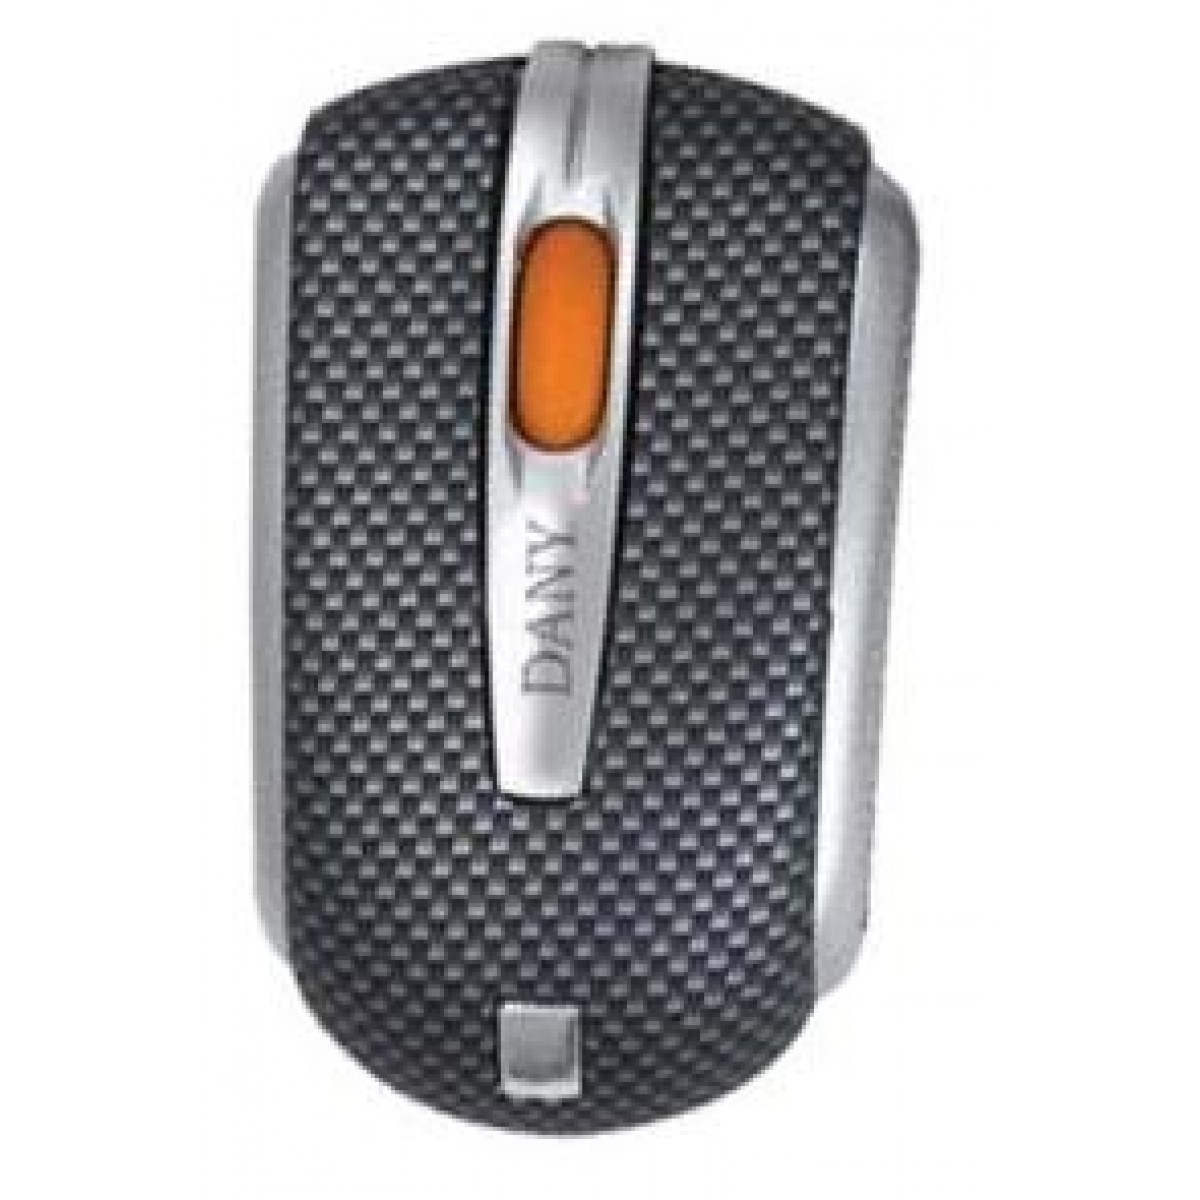 Image result for DANY TOUCHME 580 RETRACTABLE USB OPTICAL MOUSE